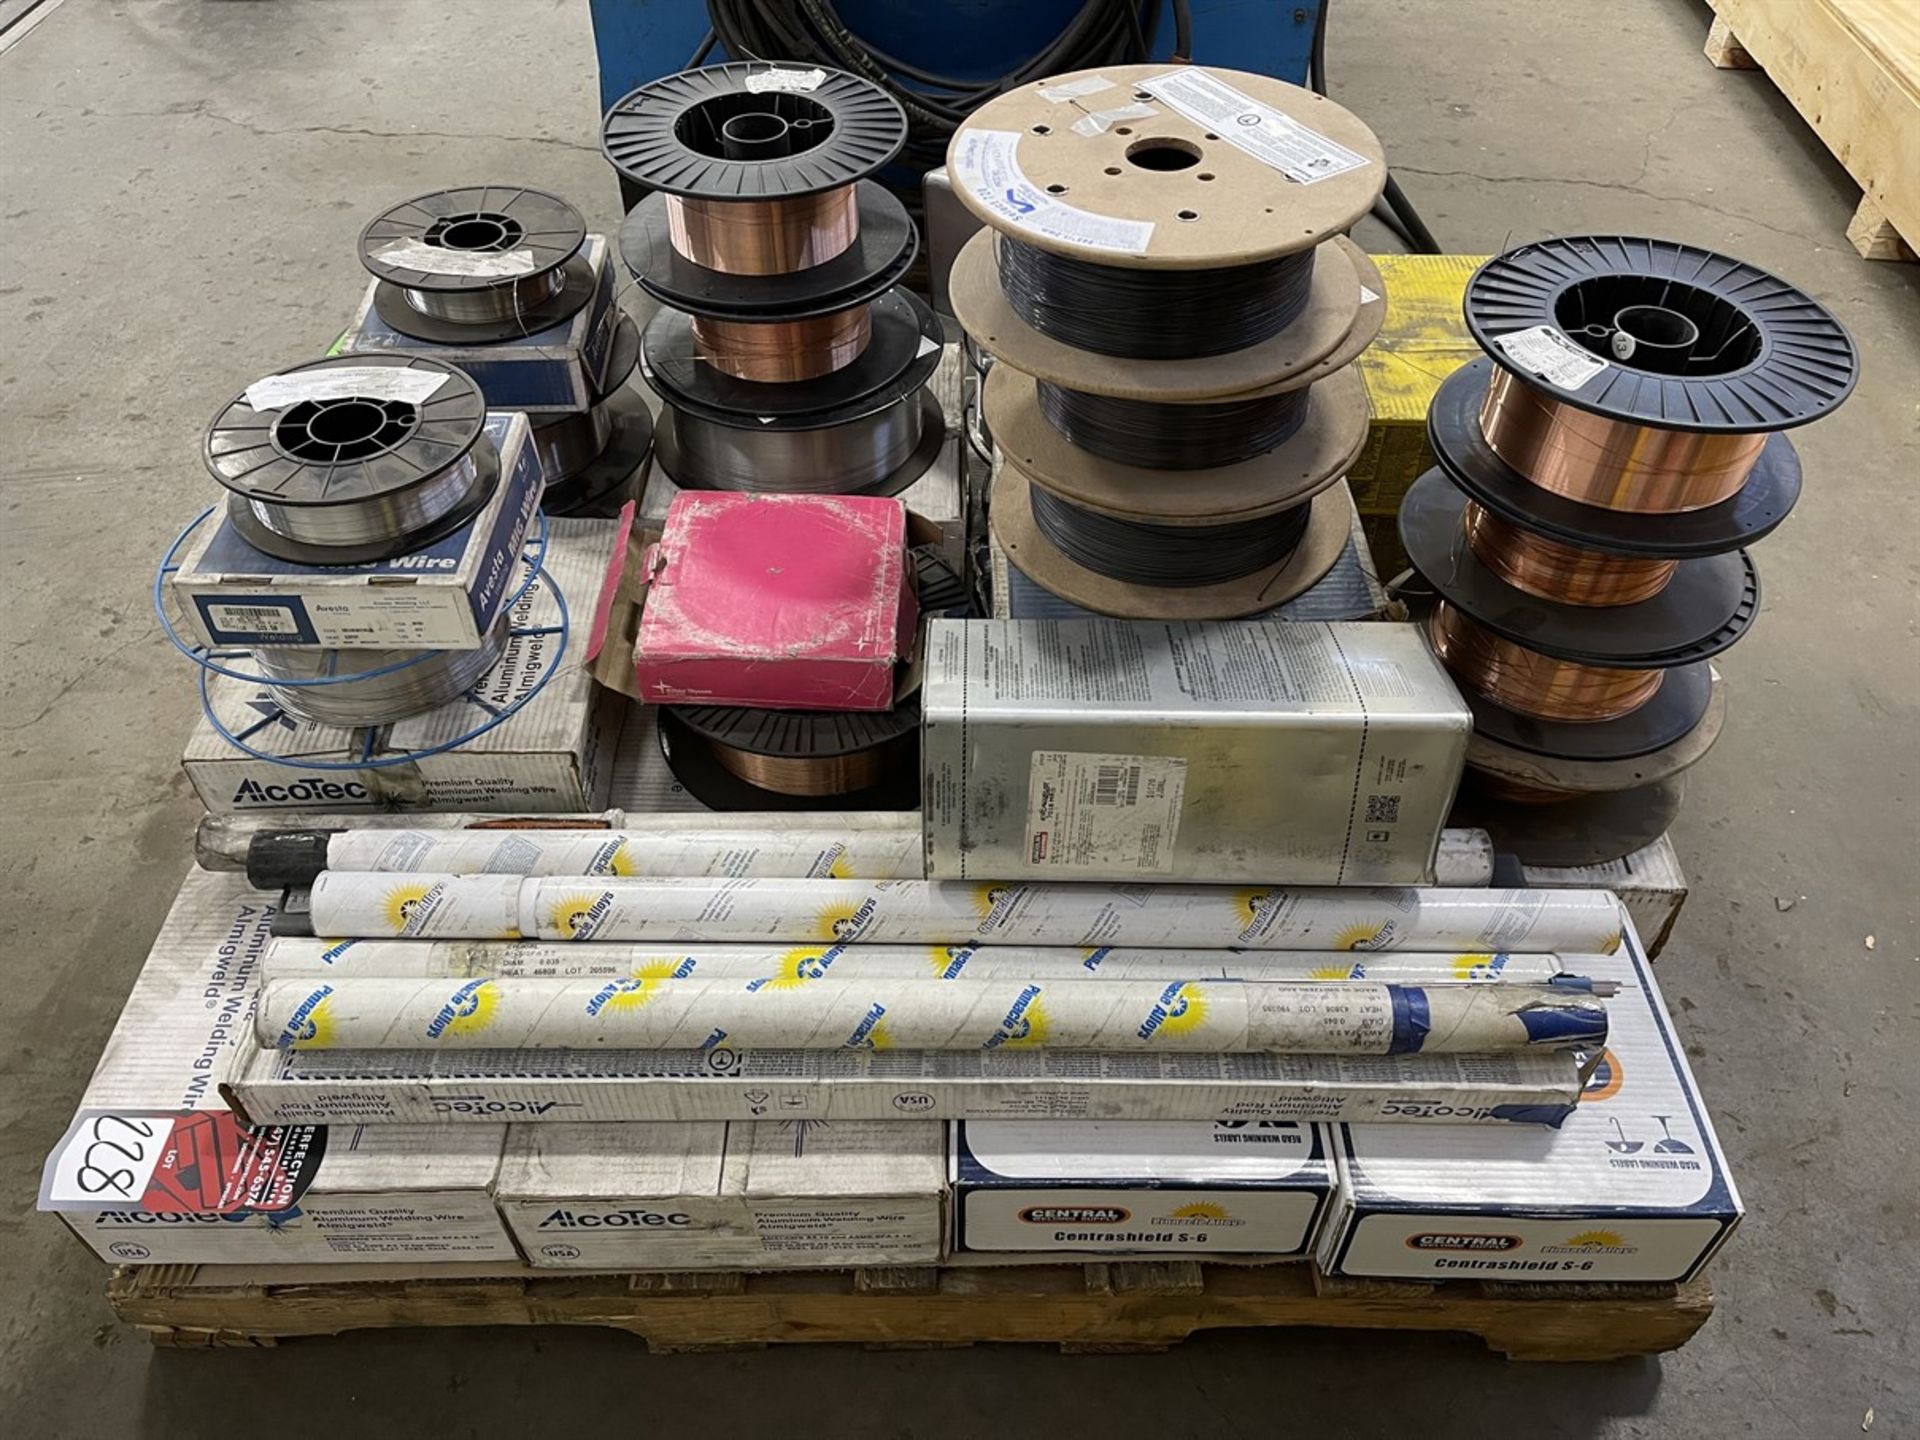 Lot of Assorted Welding Wire Spools and TIG Welding Rod Including AlcoTec ER5356, ER4043, Arcos - Image 2 of 8